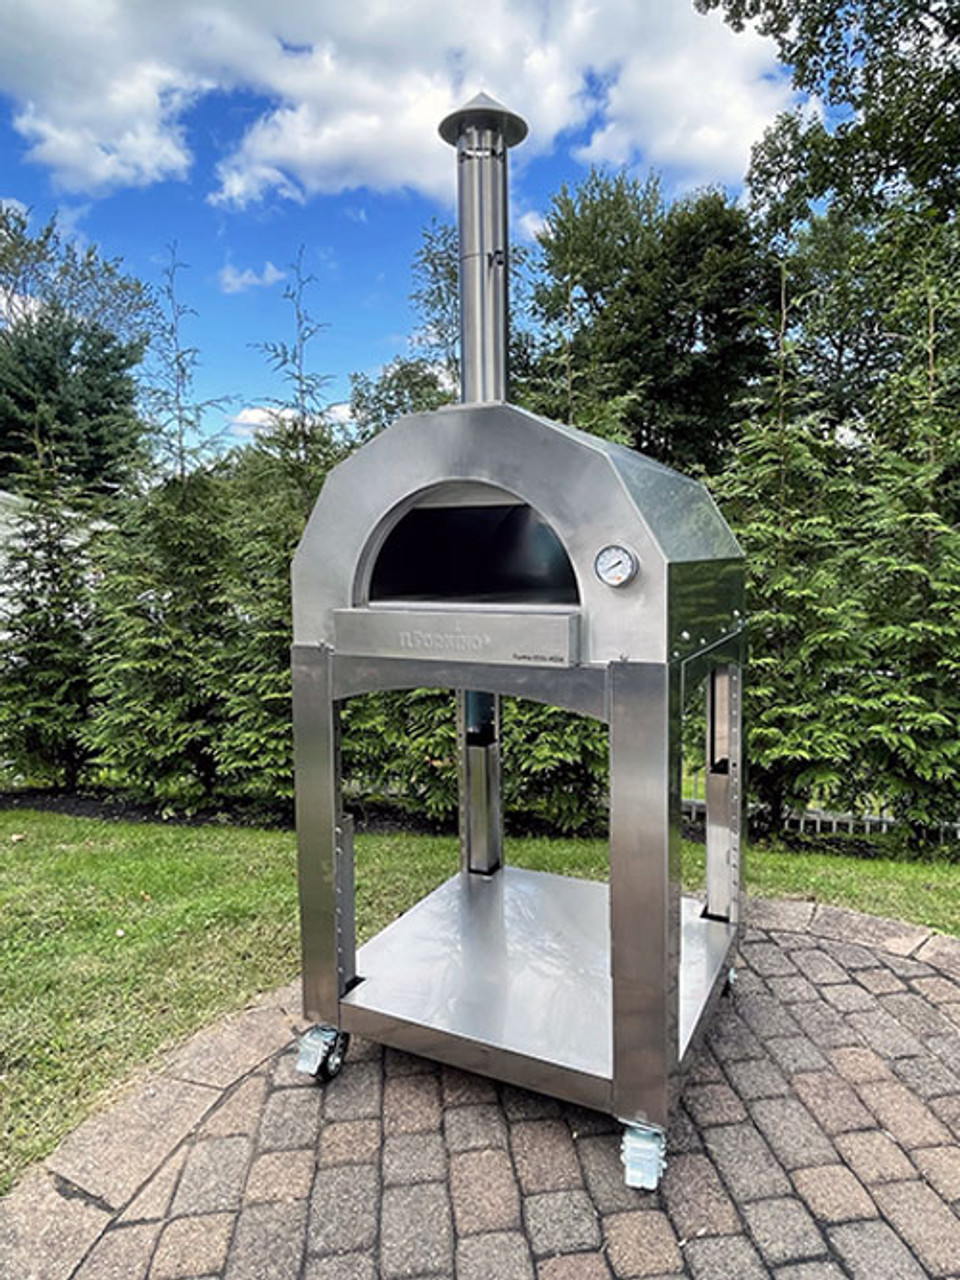 ilFornino® Fiamma Rossa– Media Stainless Steel Wood Burning Pizza Oven with Adjustable Height Stand